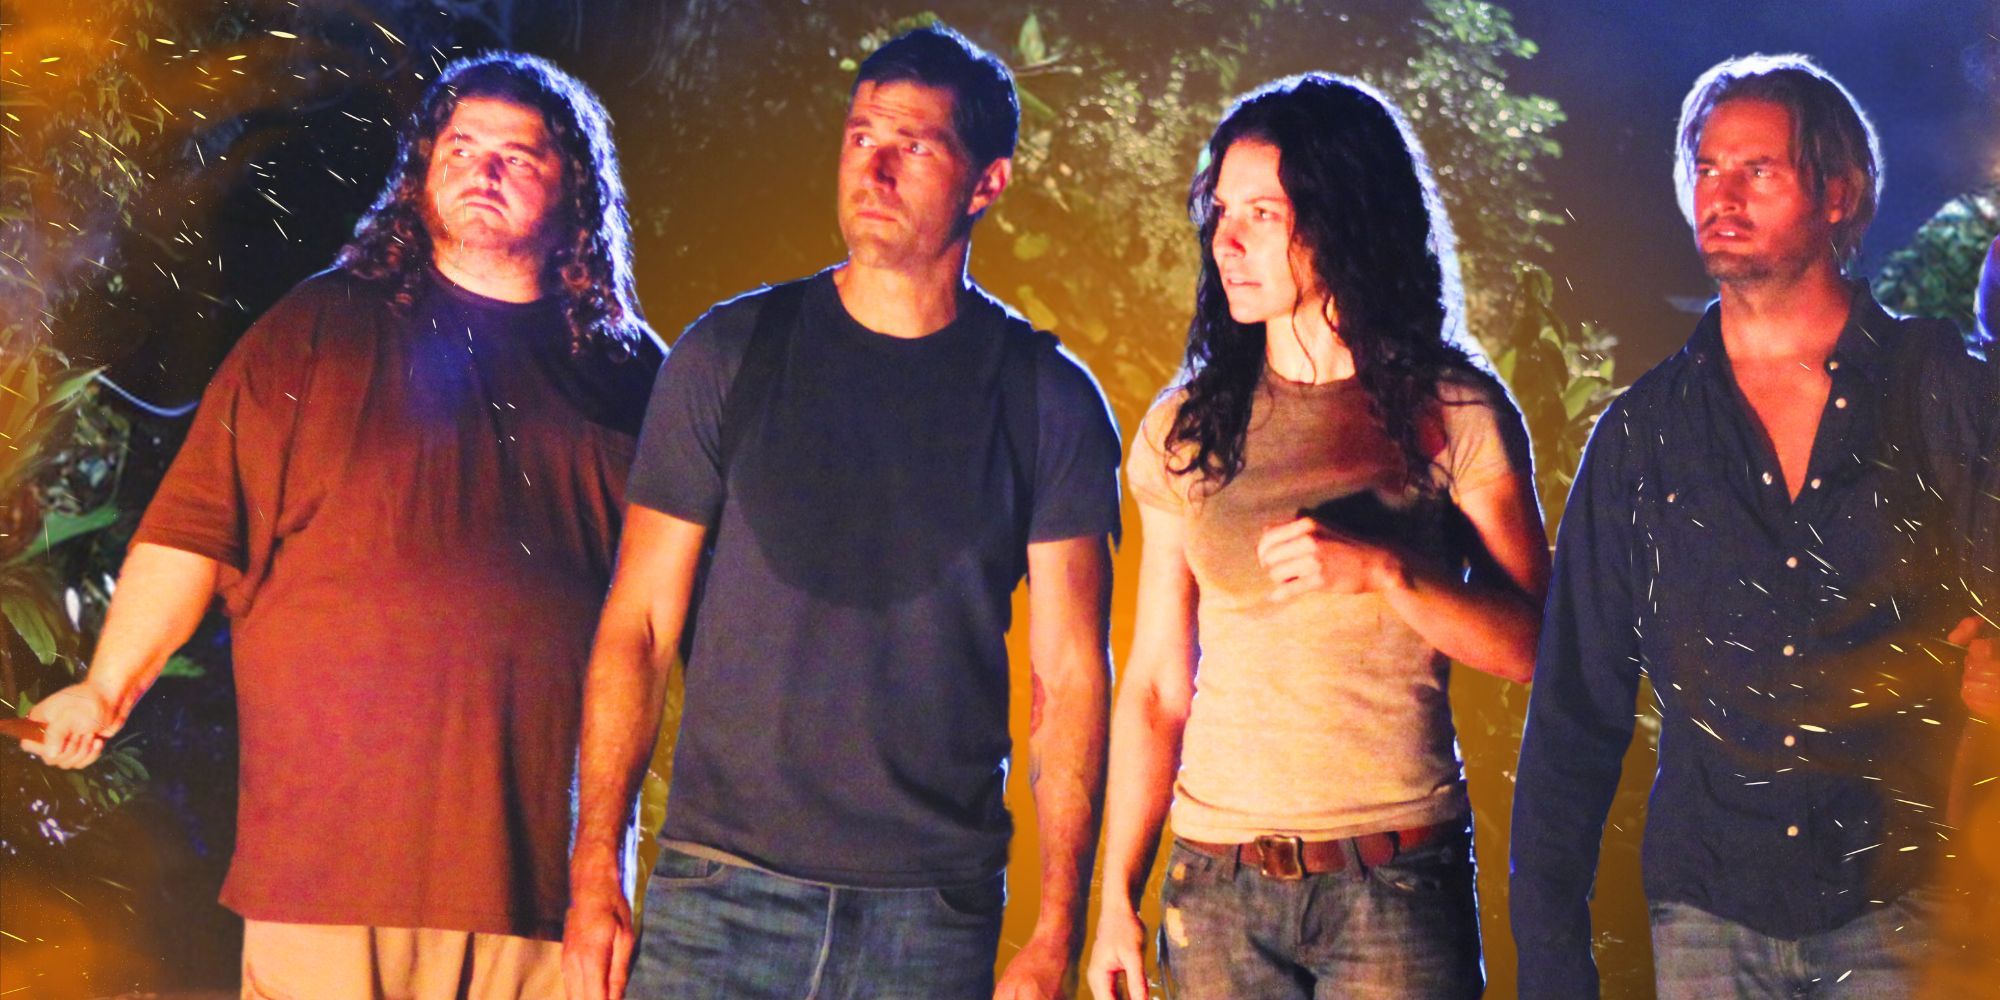 Jack, Hurley, Kate, and Sawyer in the jungle in Lost